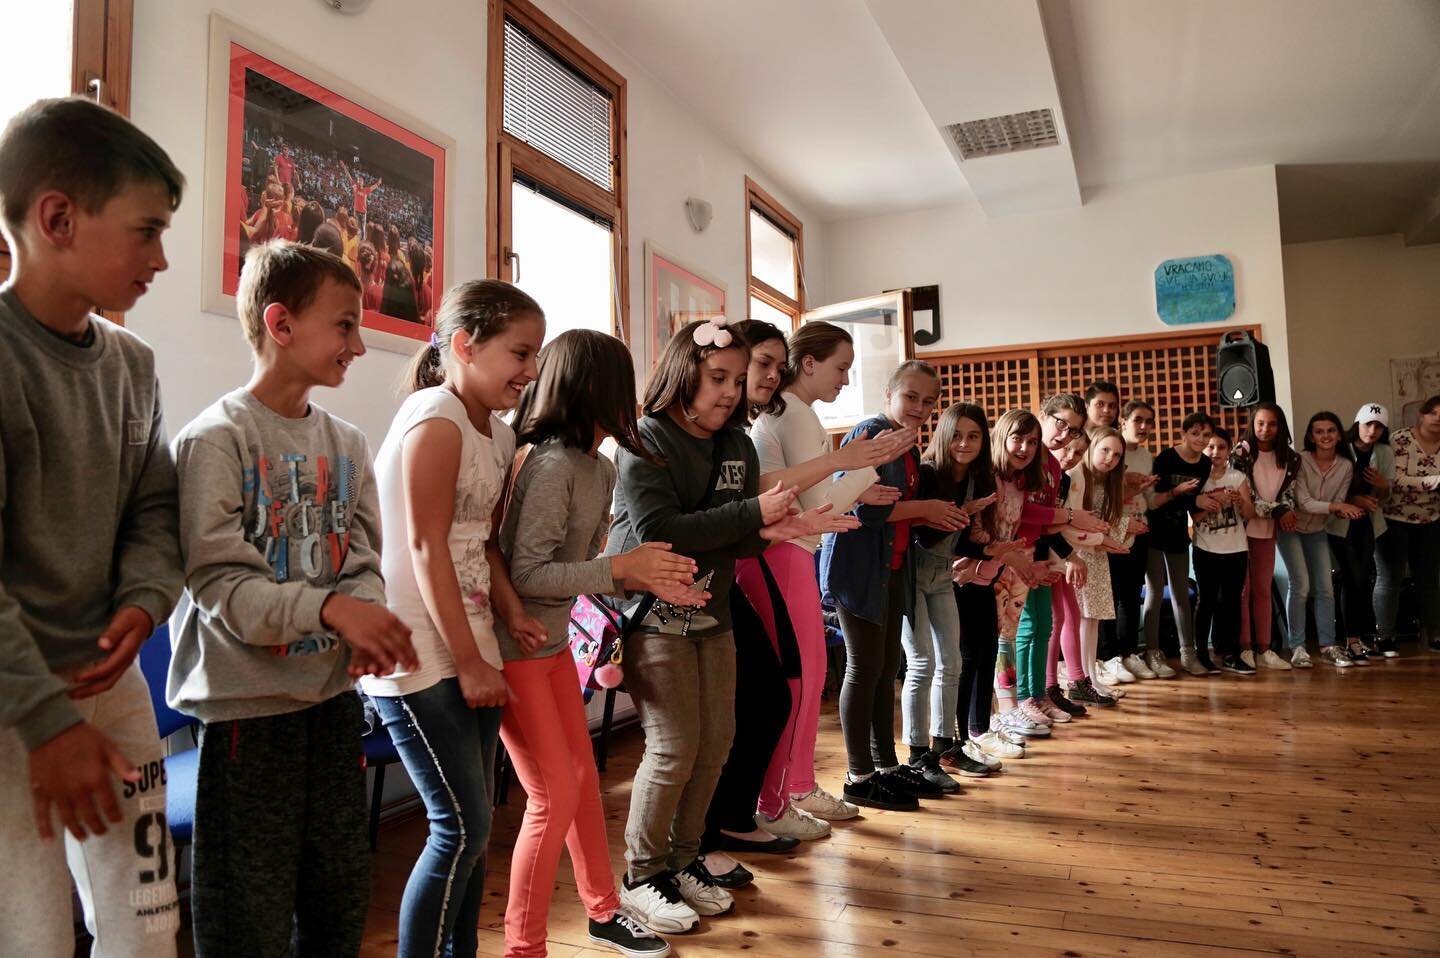 As part of our 2019 expansion, we were welcomed in the Balkans this summer. ⁣
⁣
One of our TAI Fellows lead several workshops on Collective Composition, which begins with a few team building activities before we jump into creating original music. ⁣
⁣